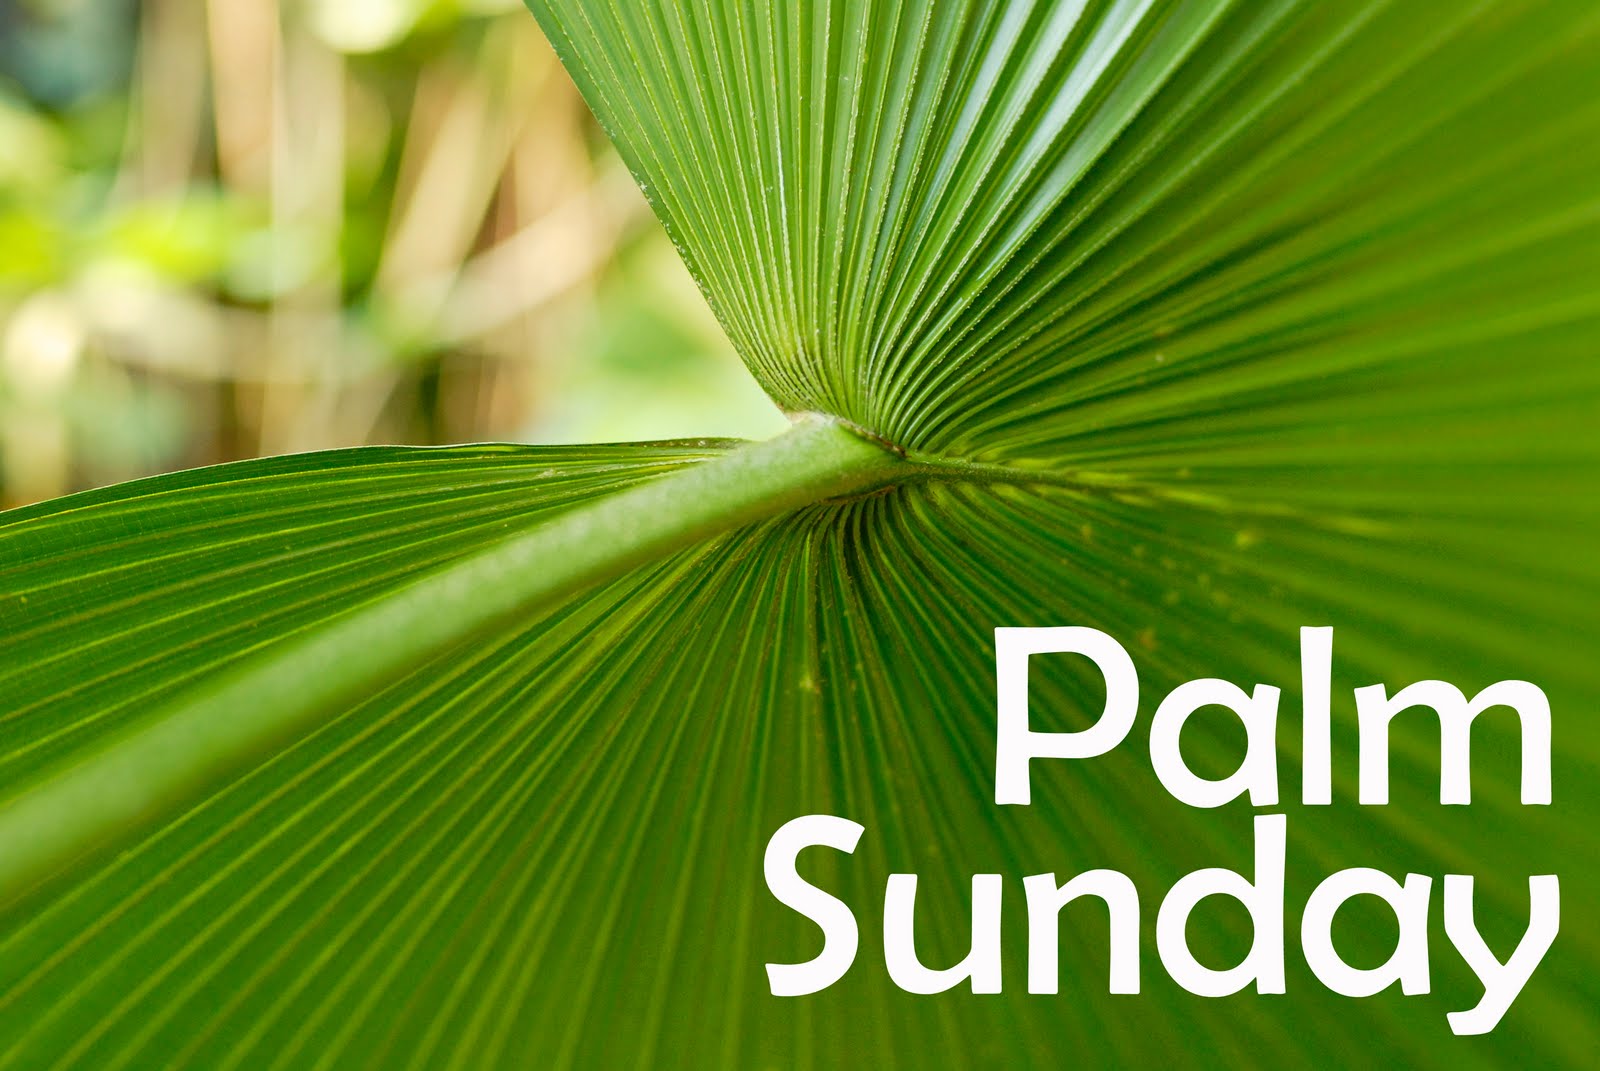 Download PicturesPool Palm Sunday greetings wallpapers [1600x1071 1600x1071